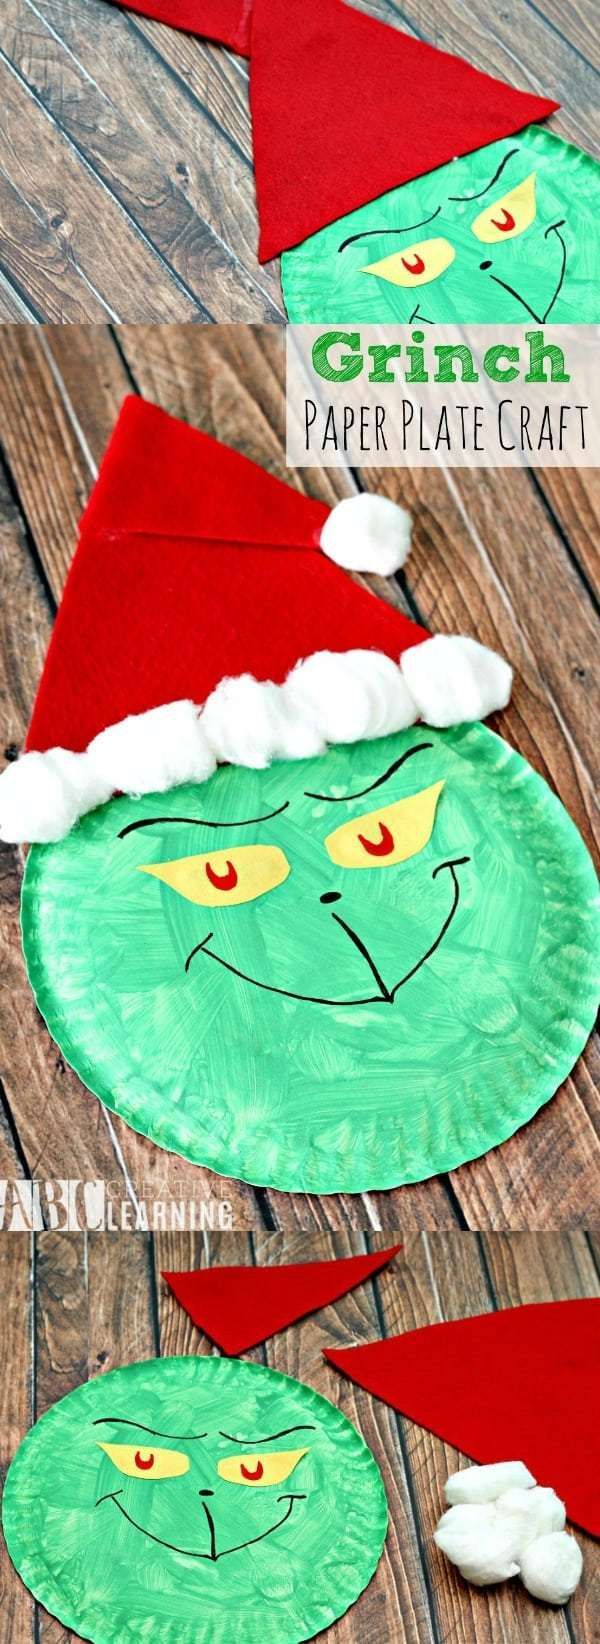 Grinch Paper Plate Craft -   17 holiday Crafts school ideas